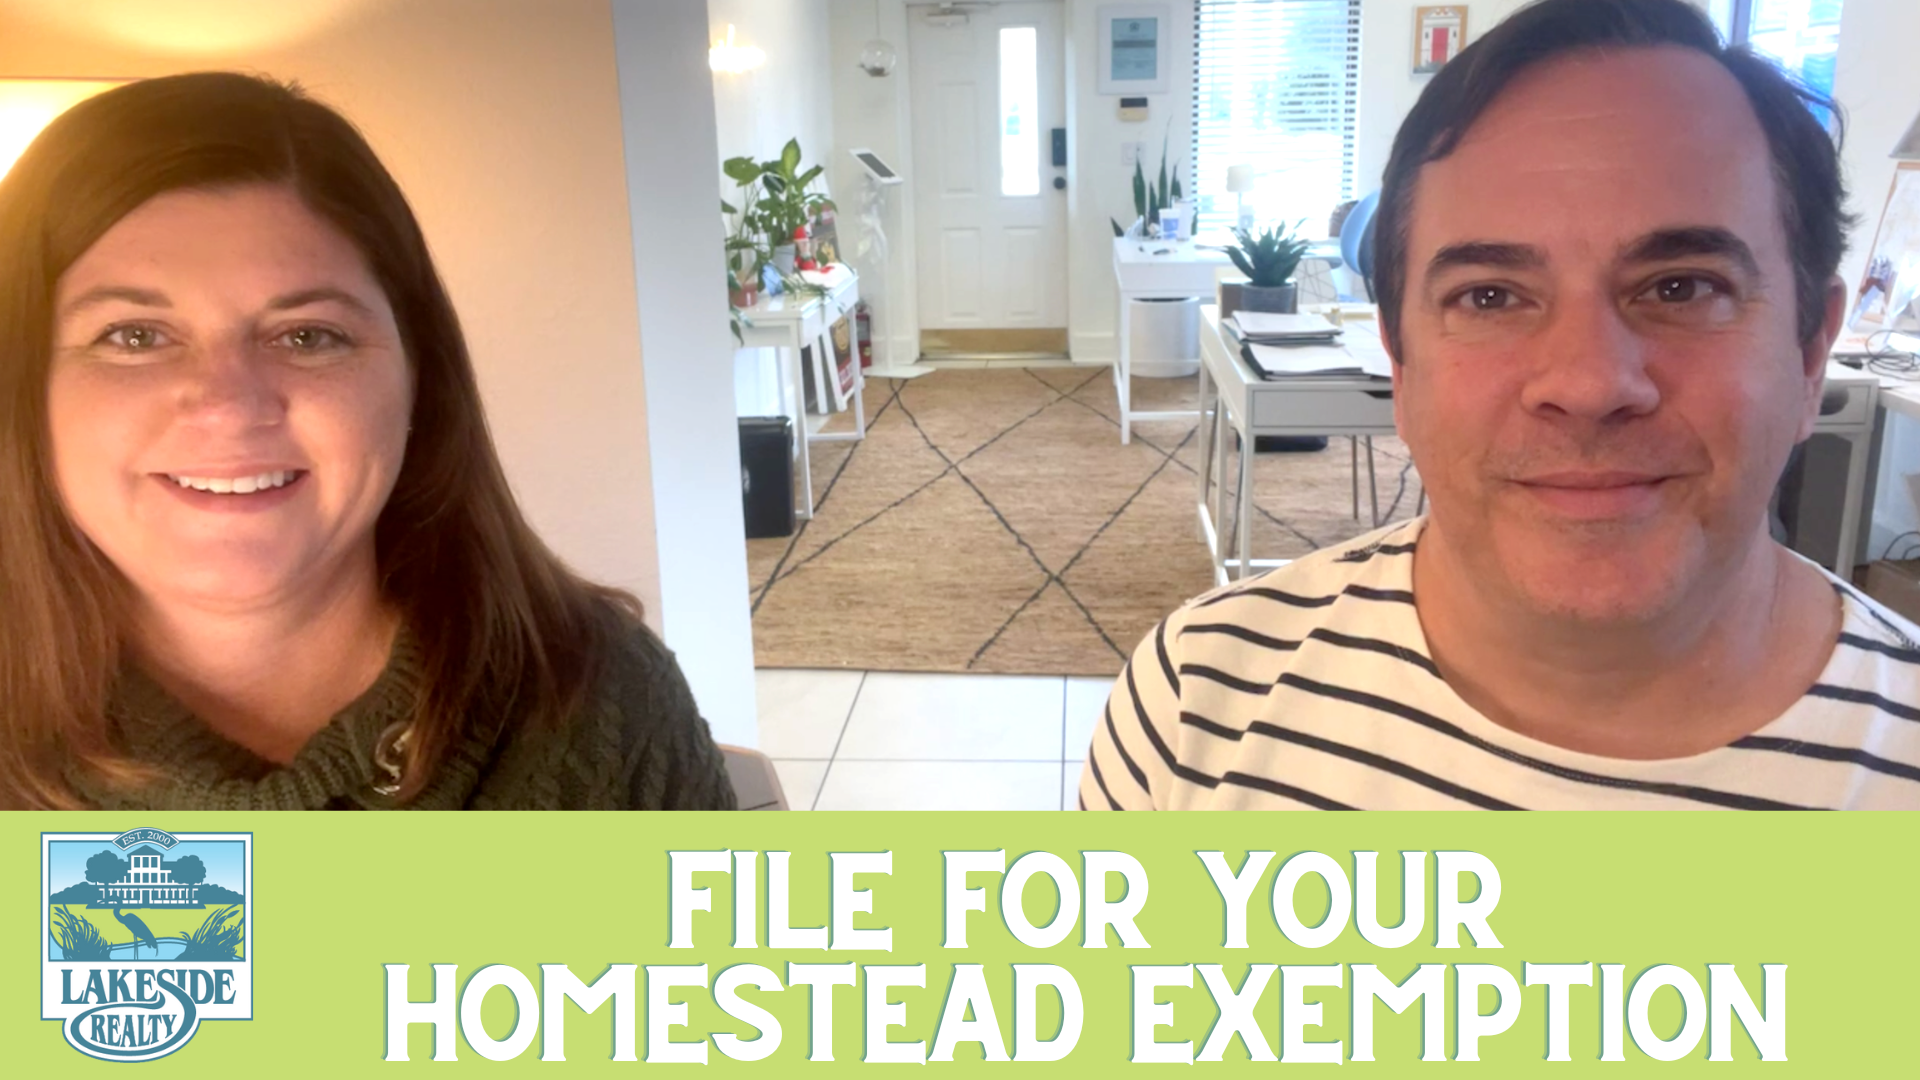 Don’t Forget Your Homestead Exemption